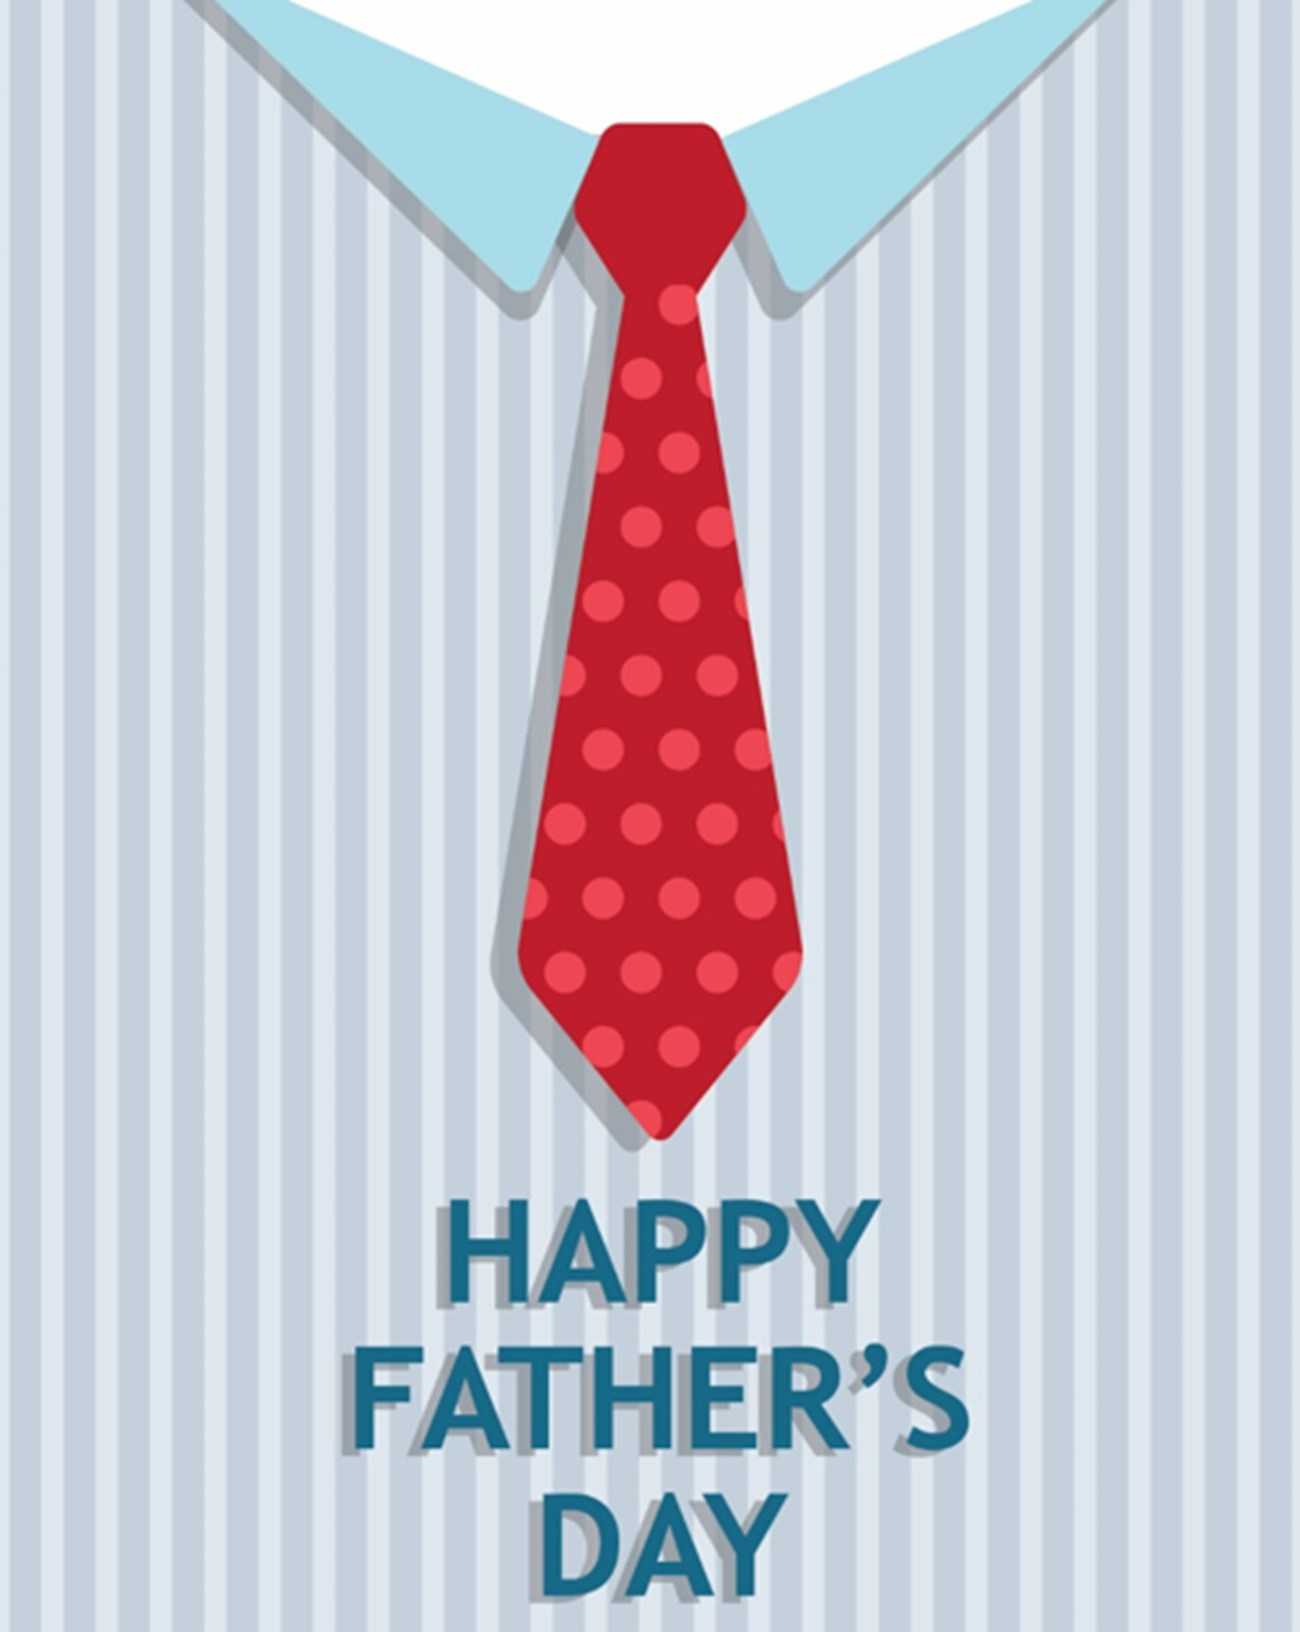 Tie Father's Day Card (Quarter Fold) With Quarter Fold Card Template